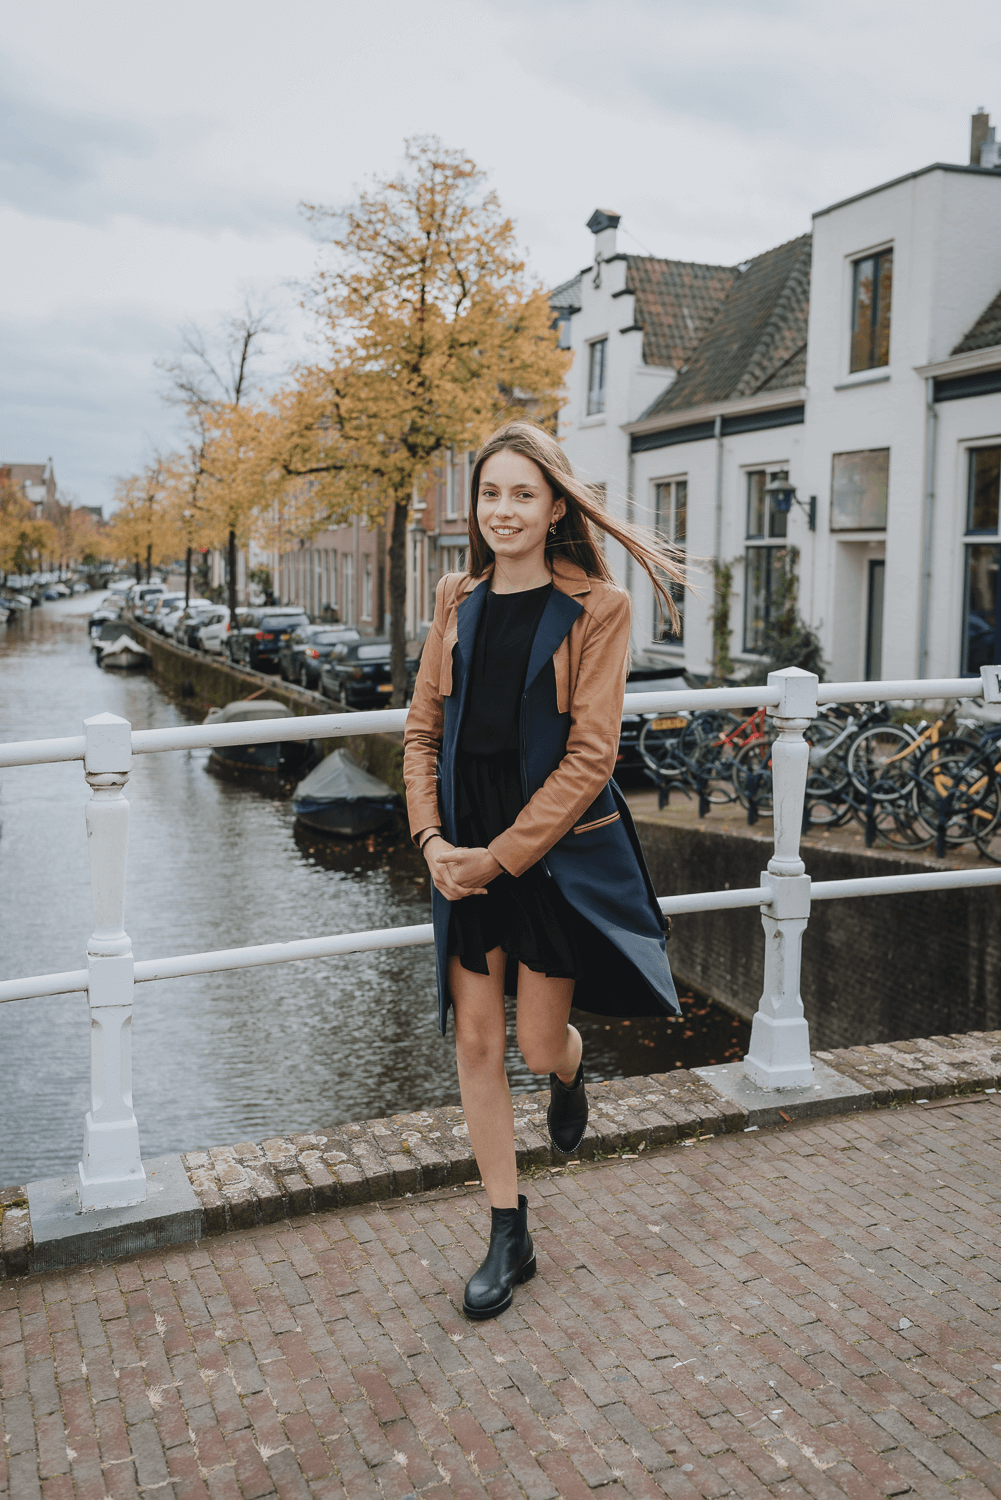 Gift Card Photoshoot in Haarlem-Amsterdam by Vicky McLachlan Photography | Bolster Family_10